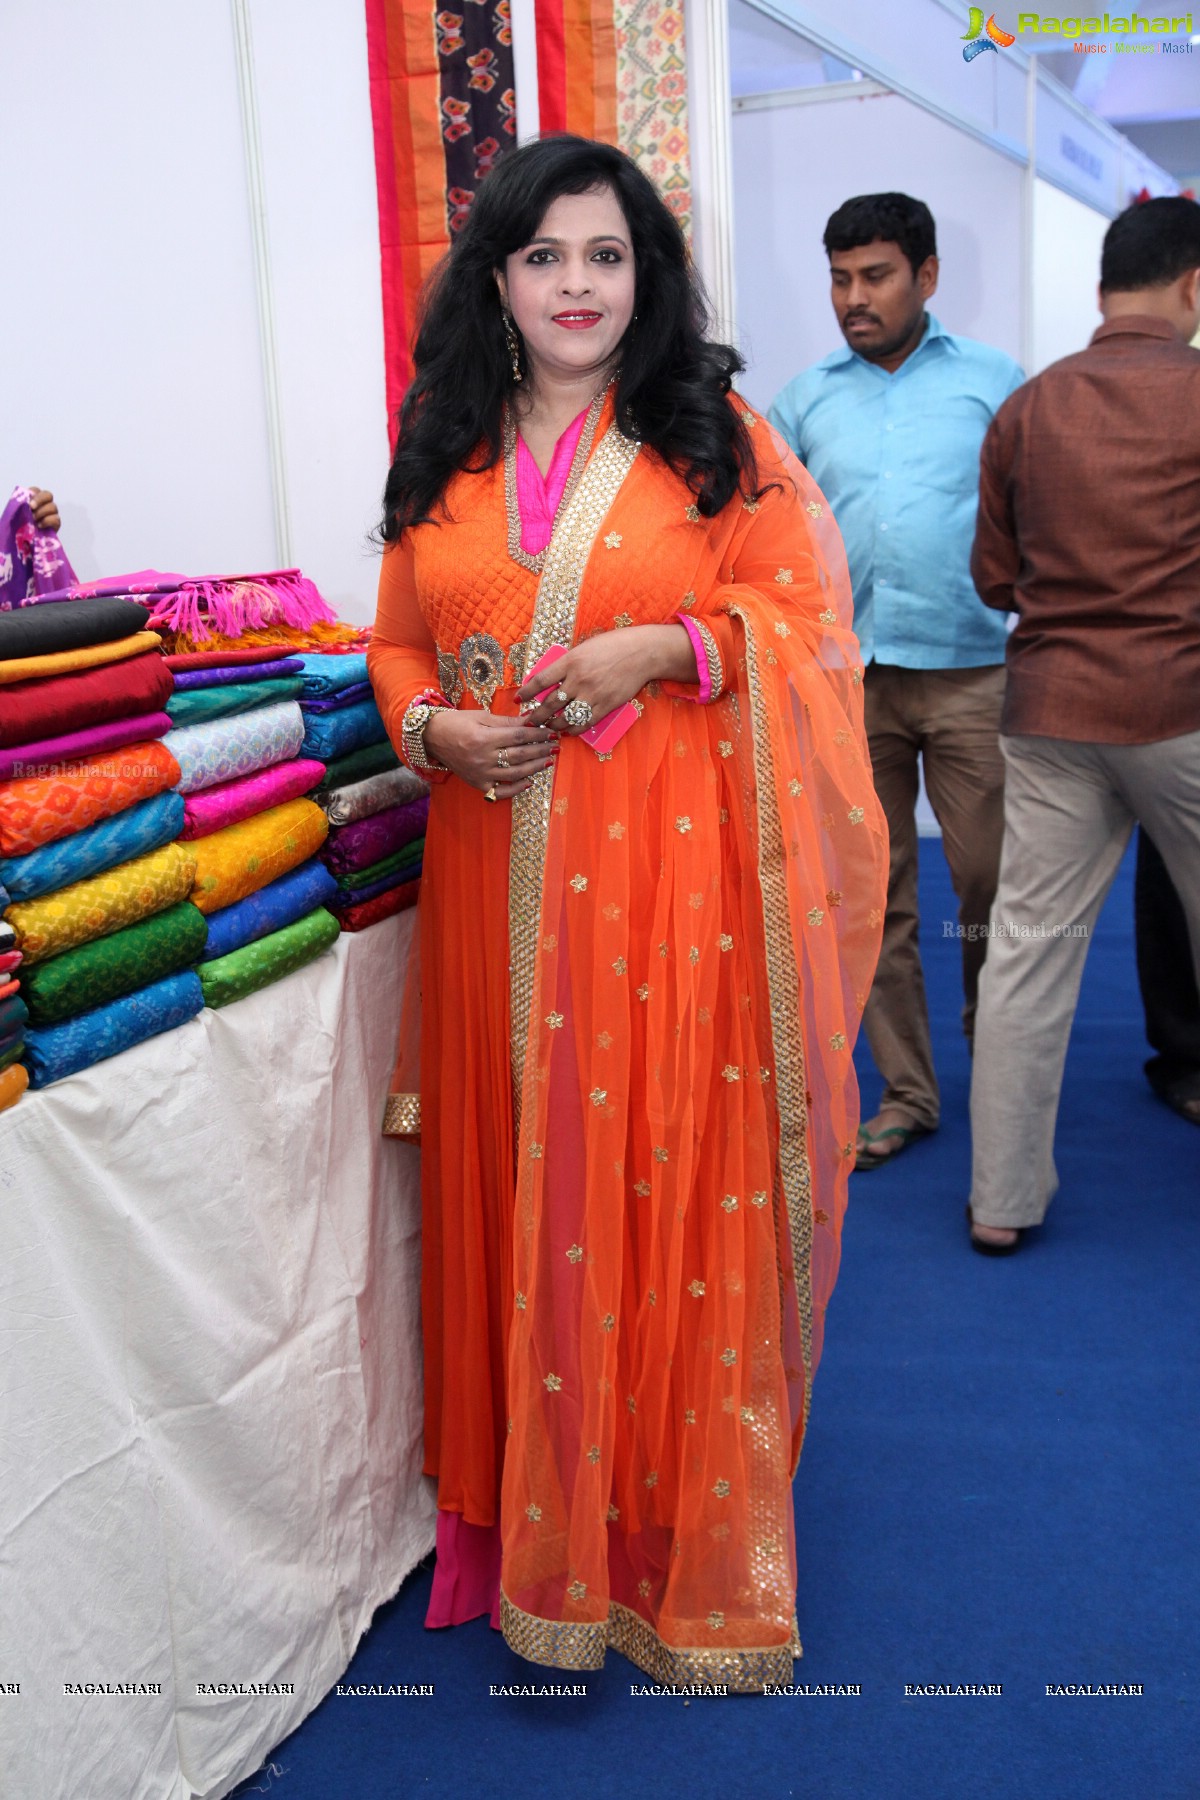 IN STYL Exhibition - Inaugurated by Sharon Fernandes, Bina Singh